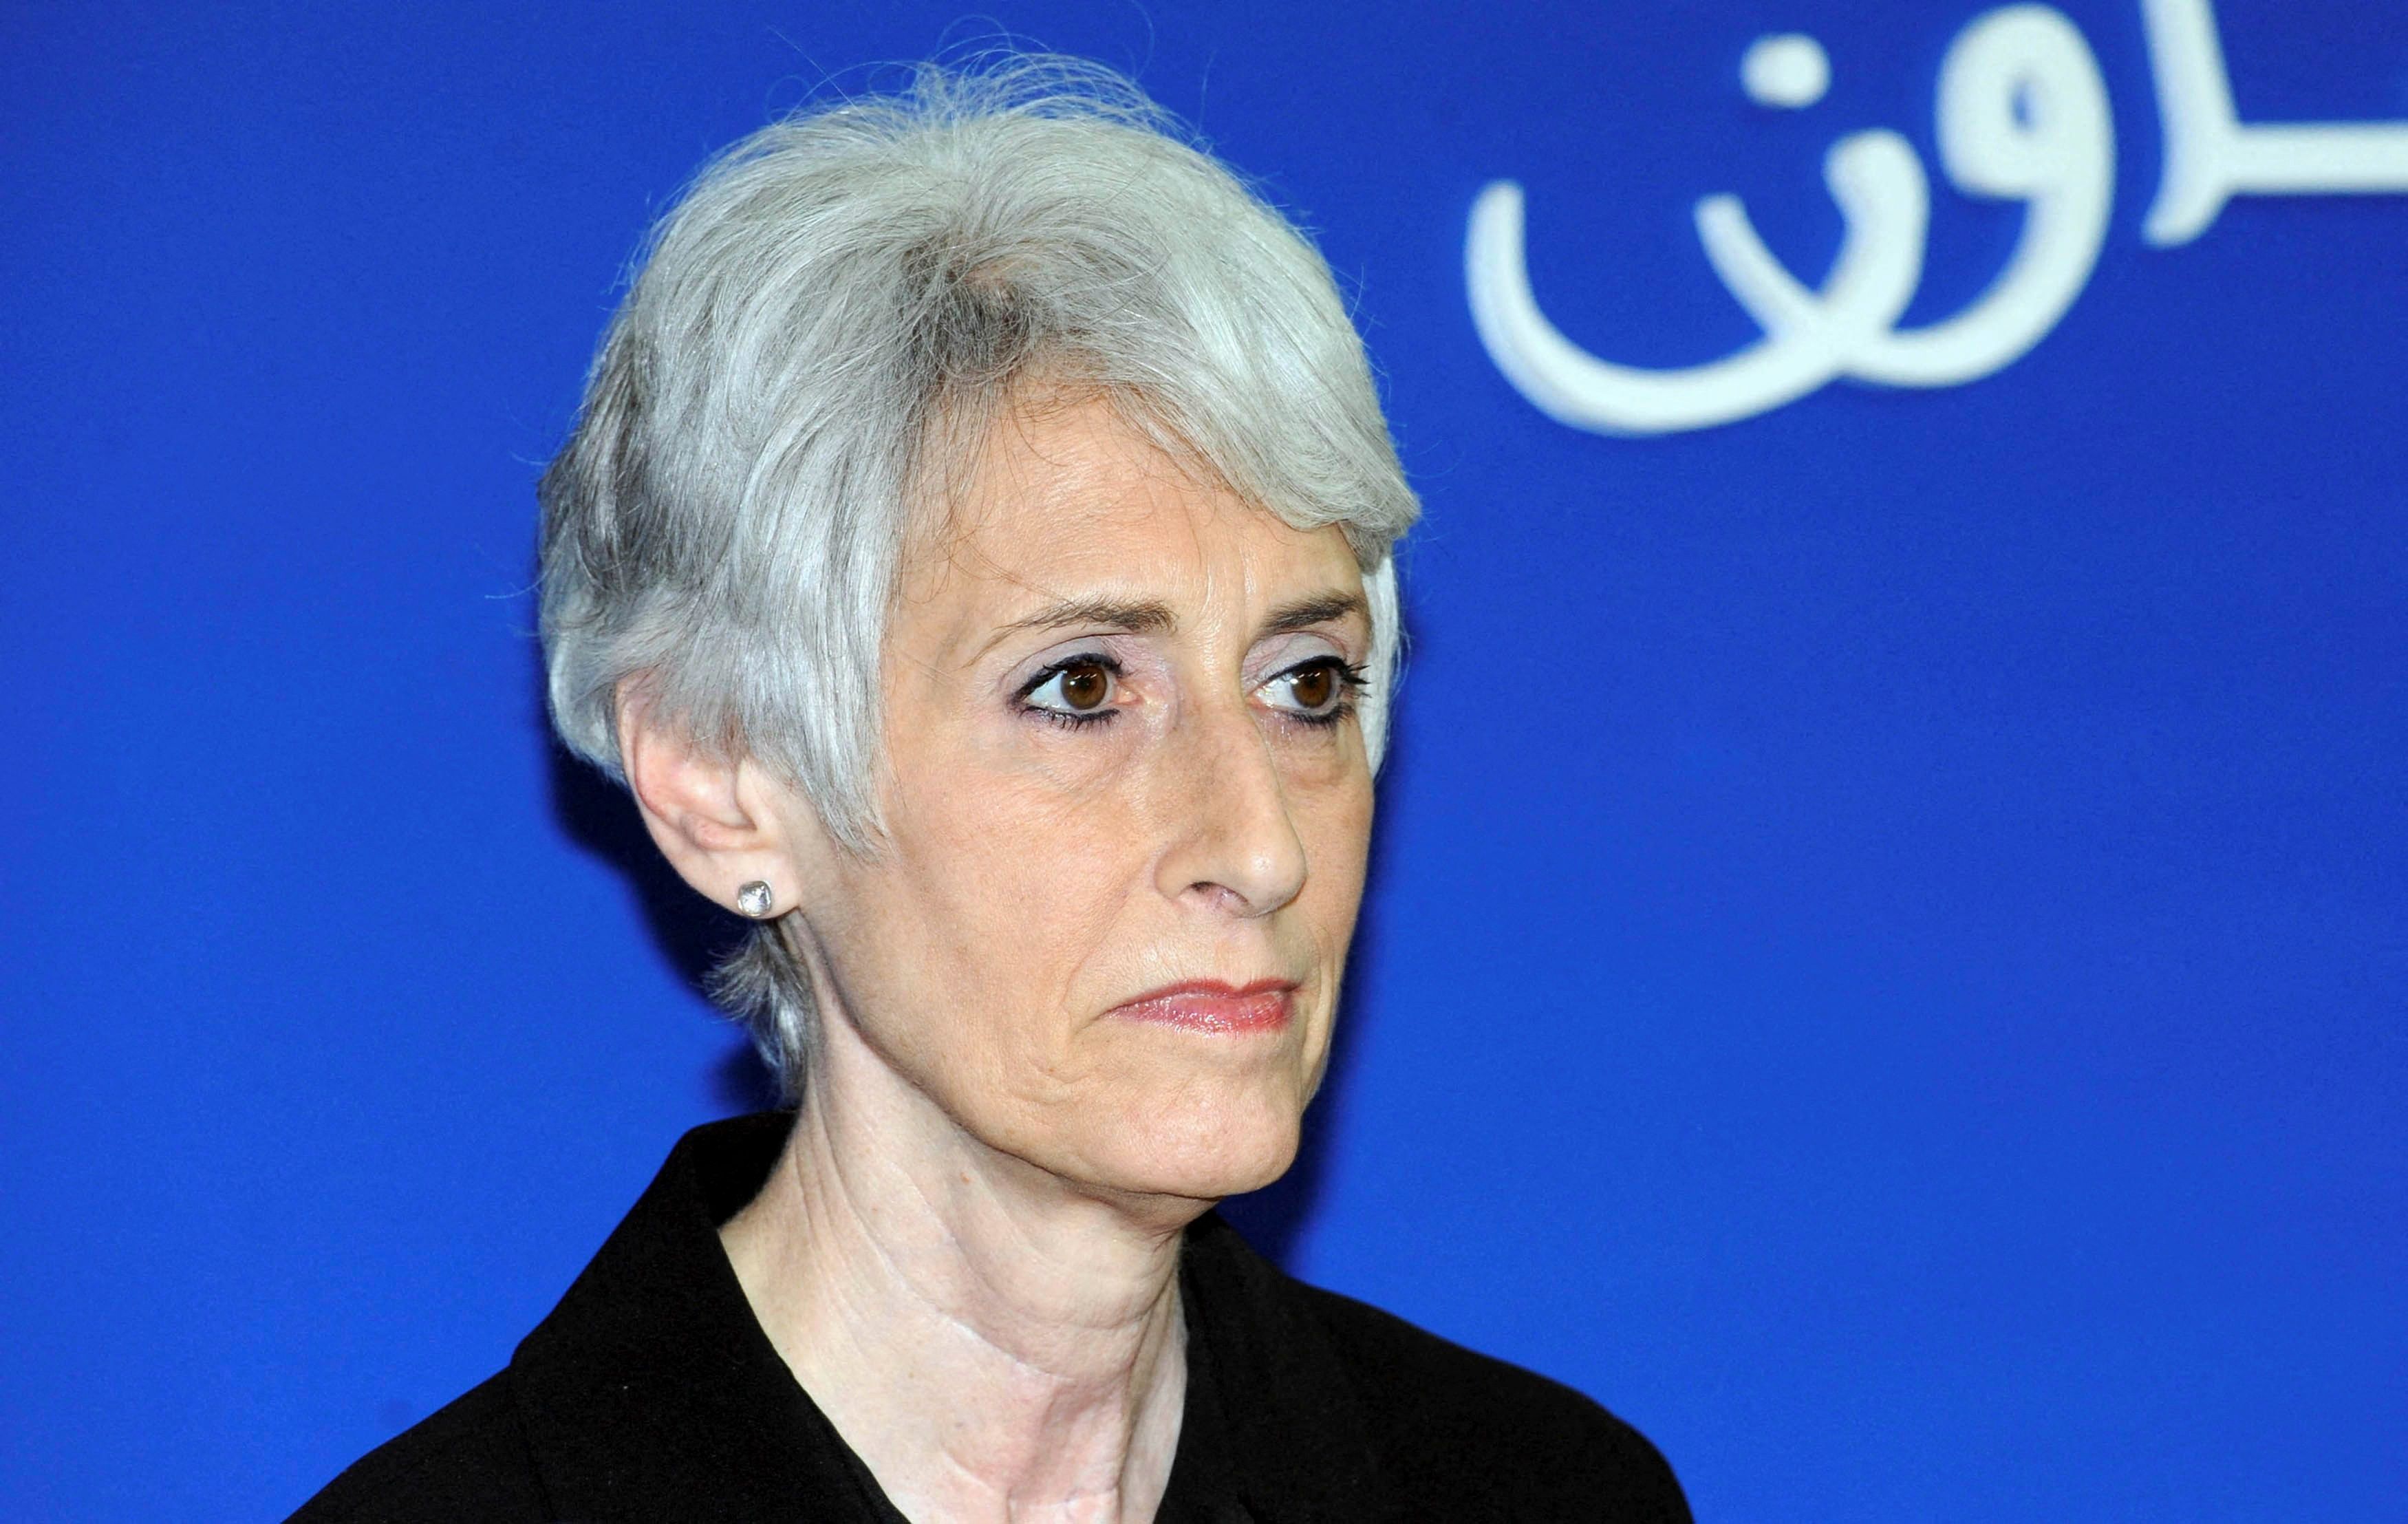 U.S. Under Secretary of State for Political Affairs Wendy Sherman attends a news conference in Rabat